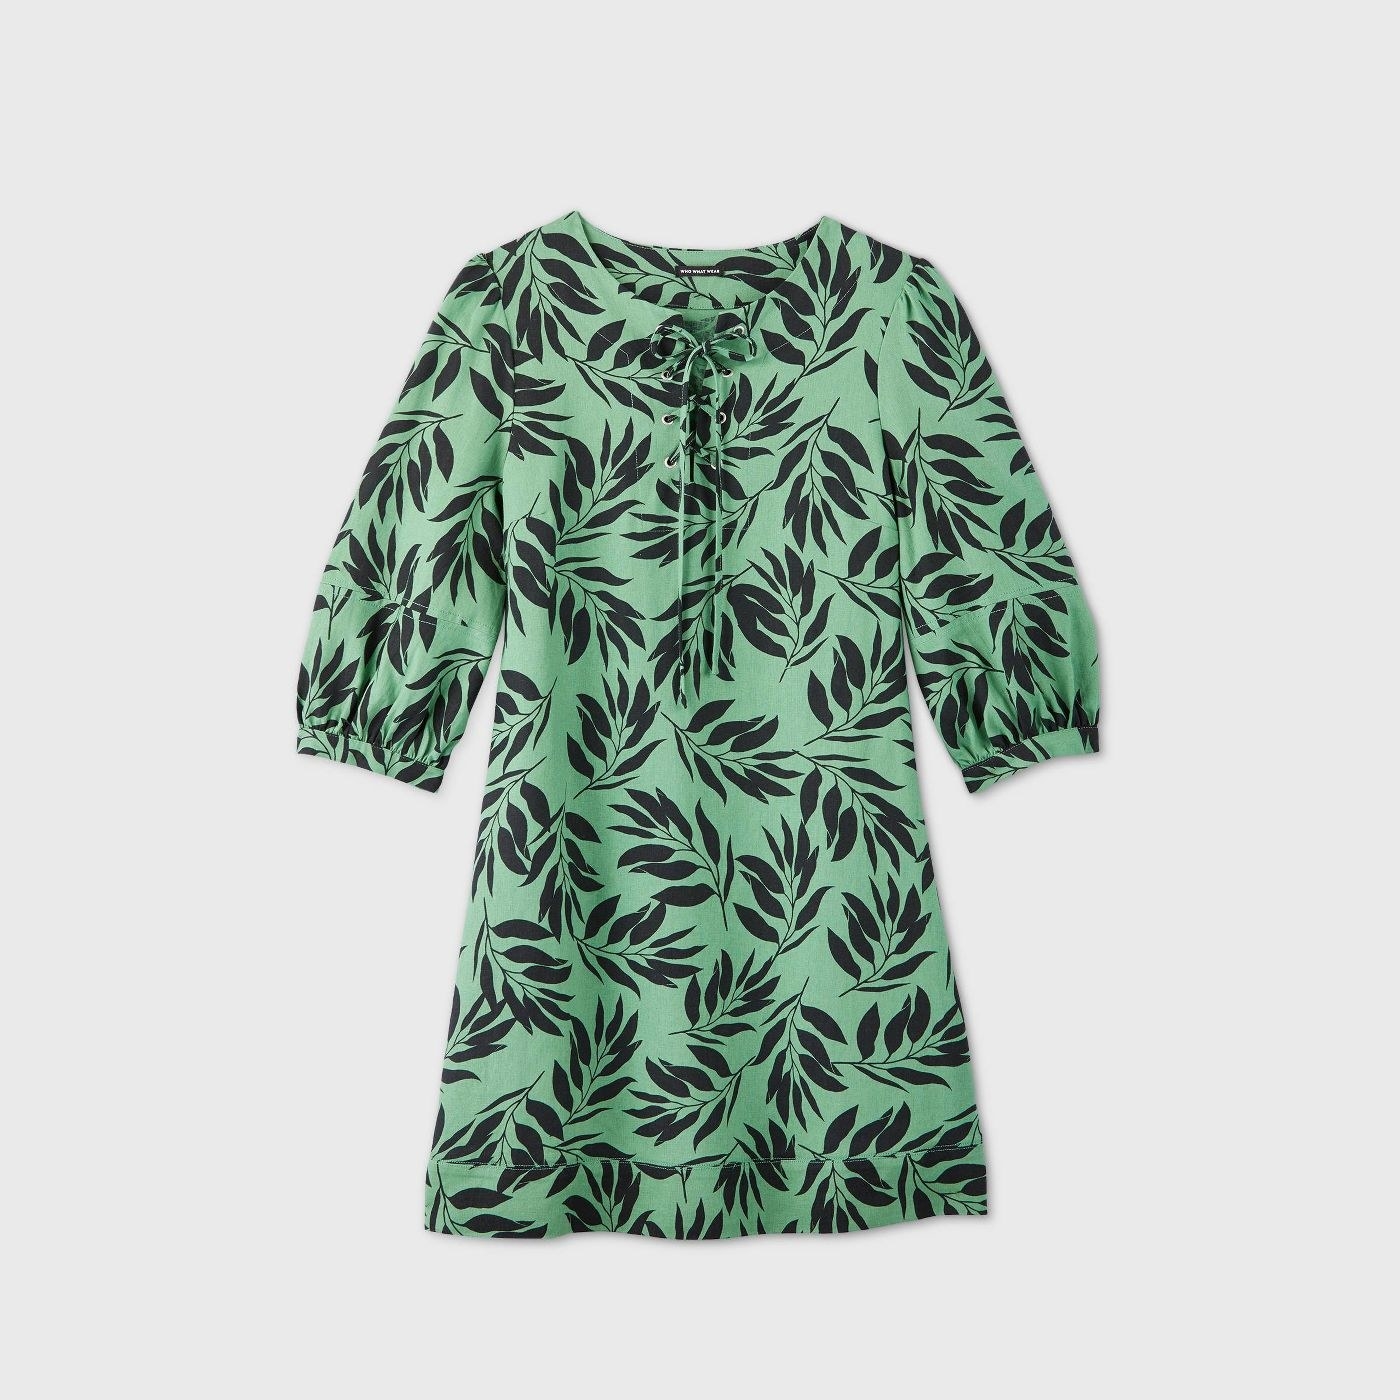 Green dress with navy leaf patterns and a bow at the neckline 